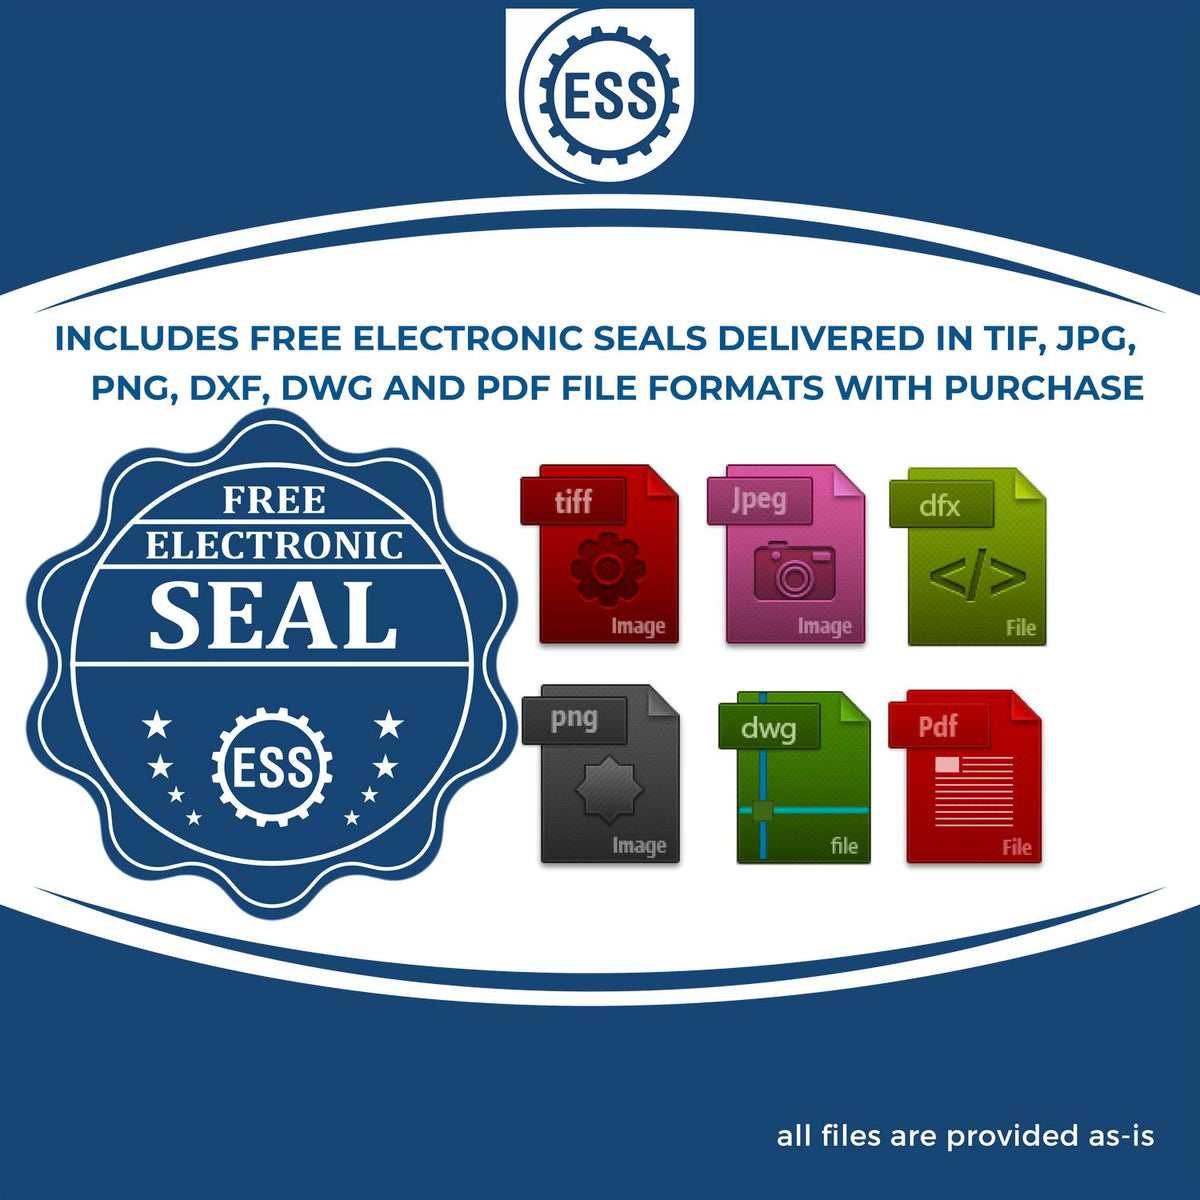 An infographic for the free electronic seal for the Self-Inking Indiana Geologist Stamp illustrating the different file type icons such as DXF, DWG, TIF, JPG and PNG.